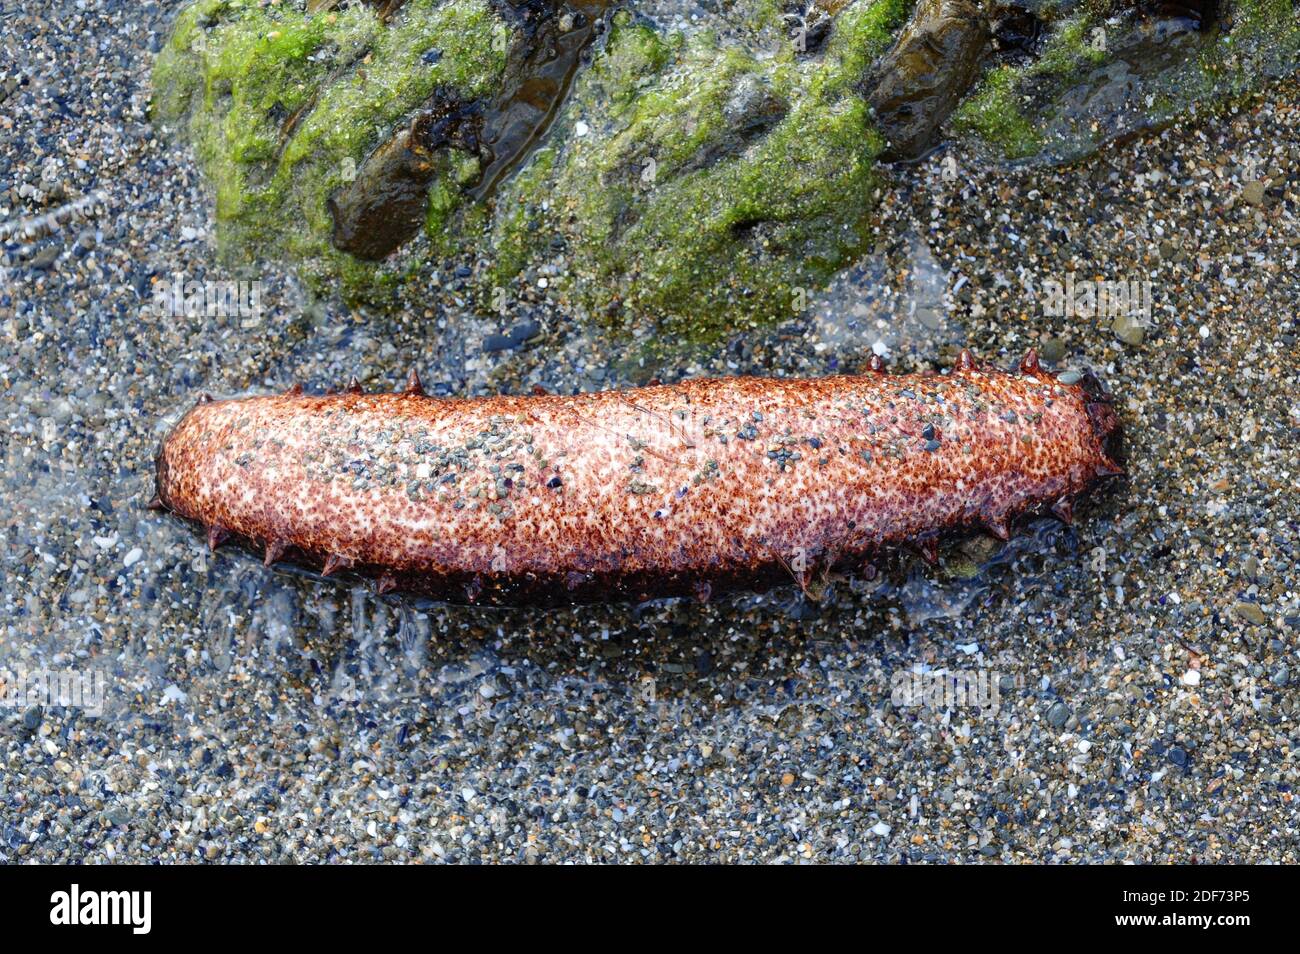 Black sea cucumber (Holothuria forskali) lower face. This photo was taken in Cap Creus, Girona province, Catalonia, Spain. Stock Photo